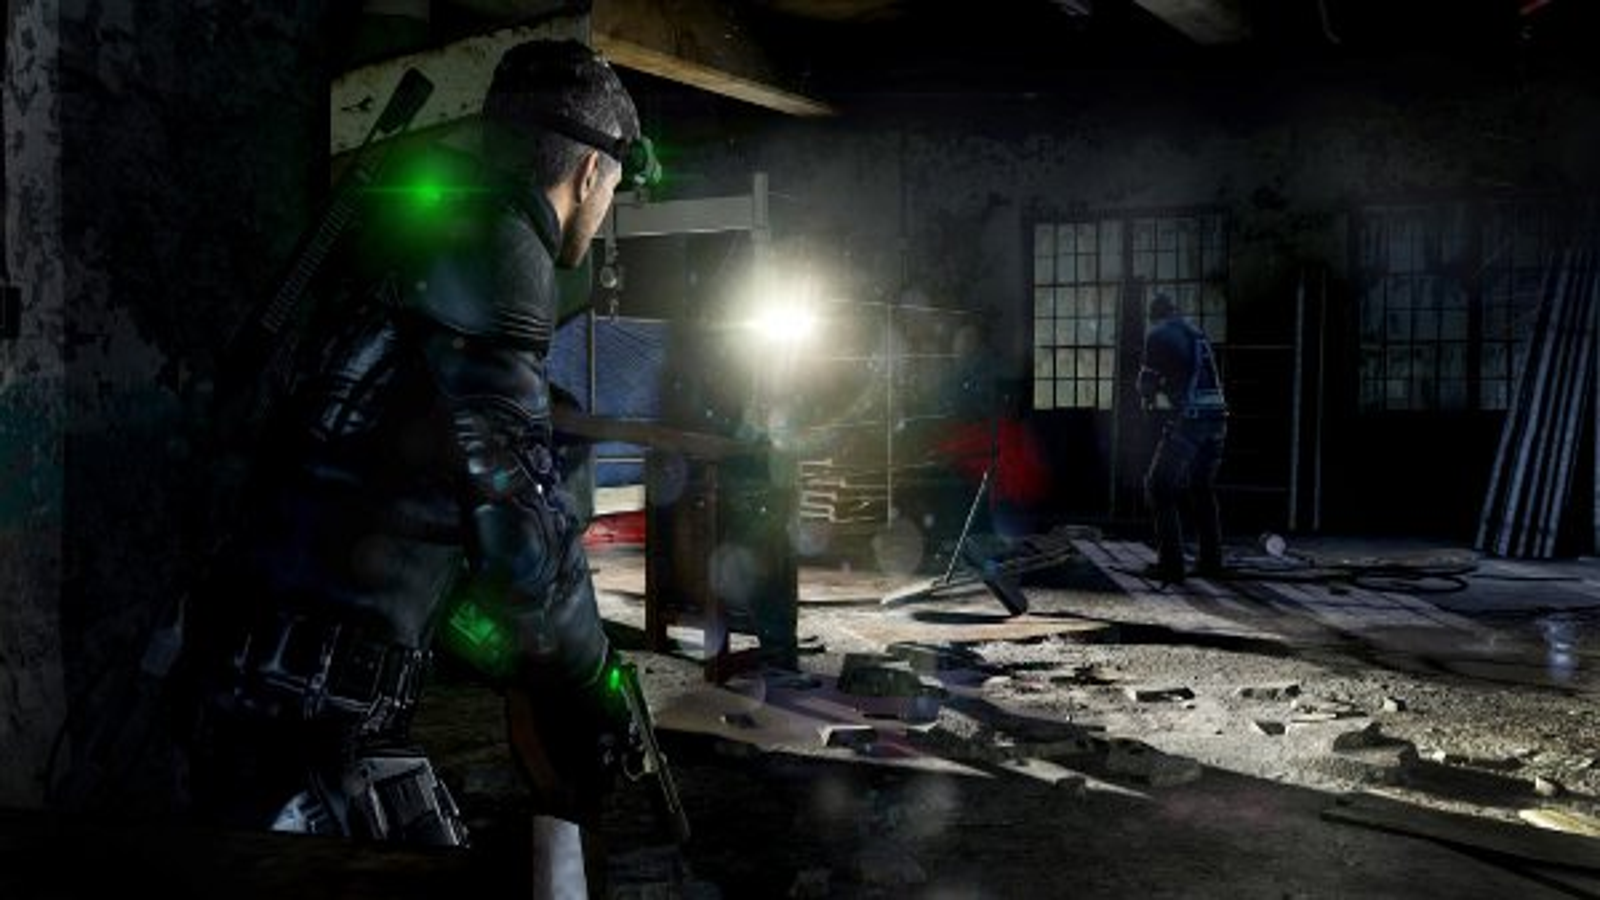 Tom Clancy's Splinter Cell Conviction  Video Game Reviews and Previews PC,  PS4, Xbox One and mobile